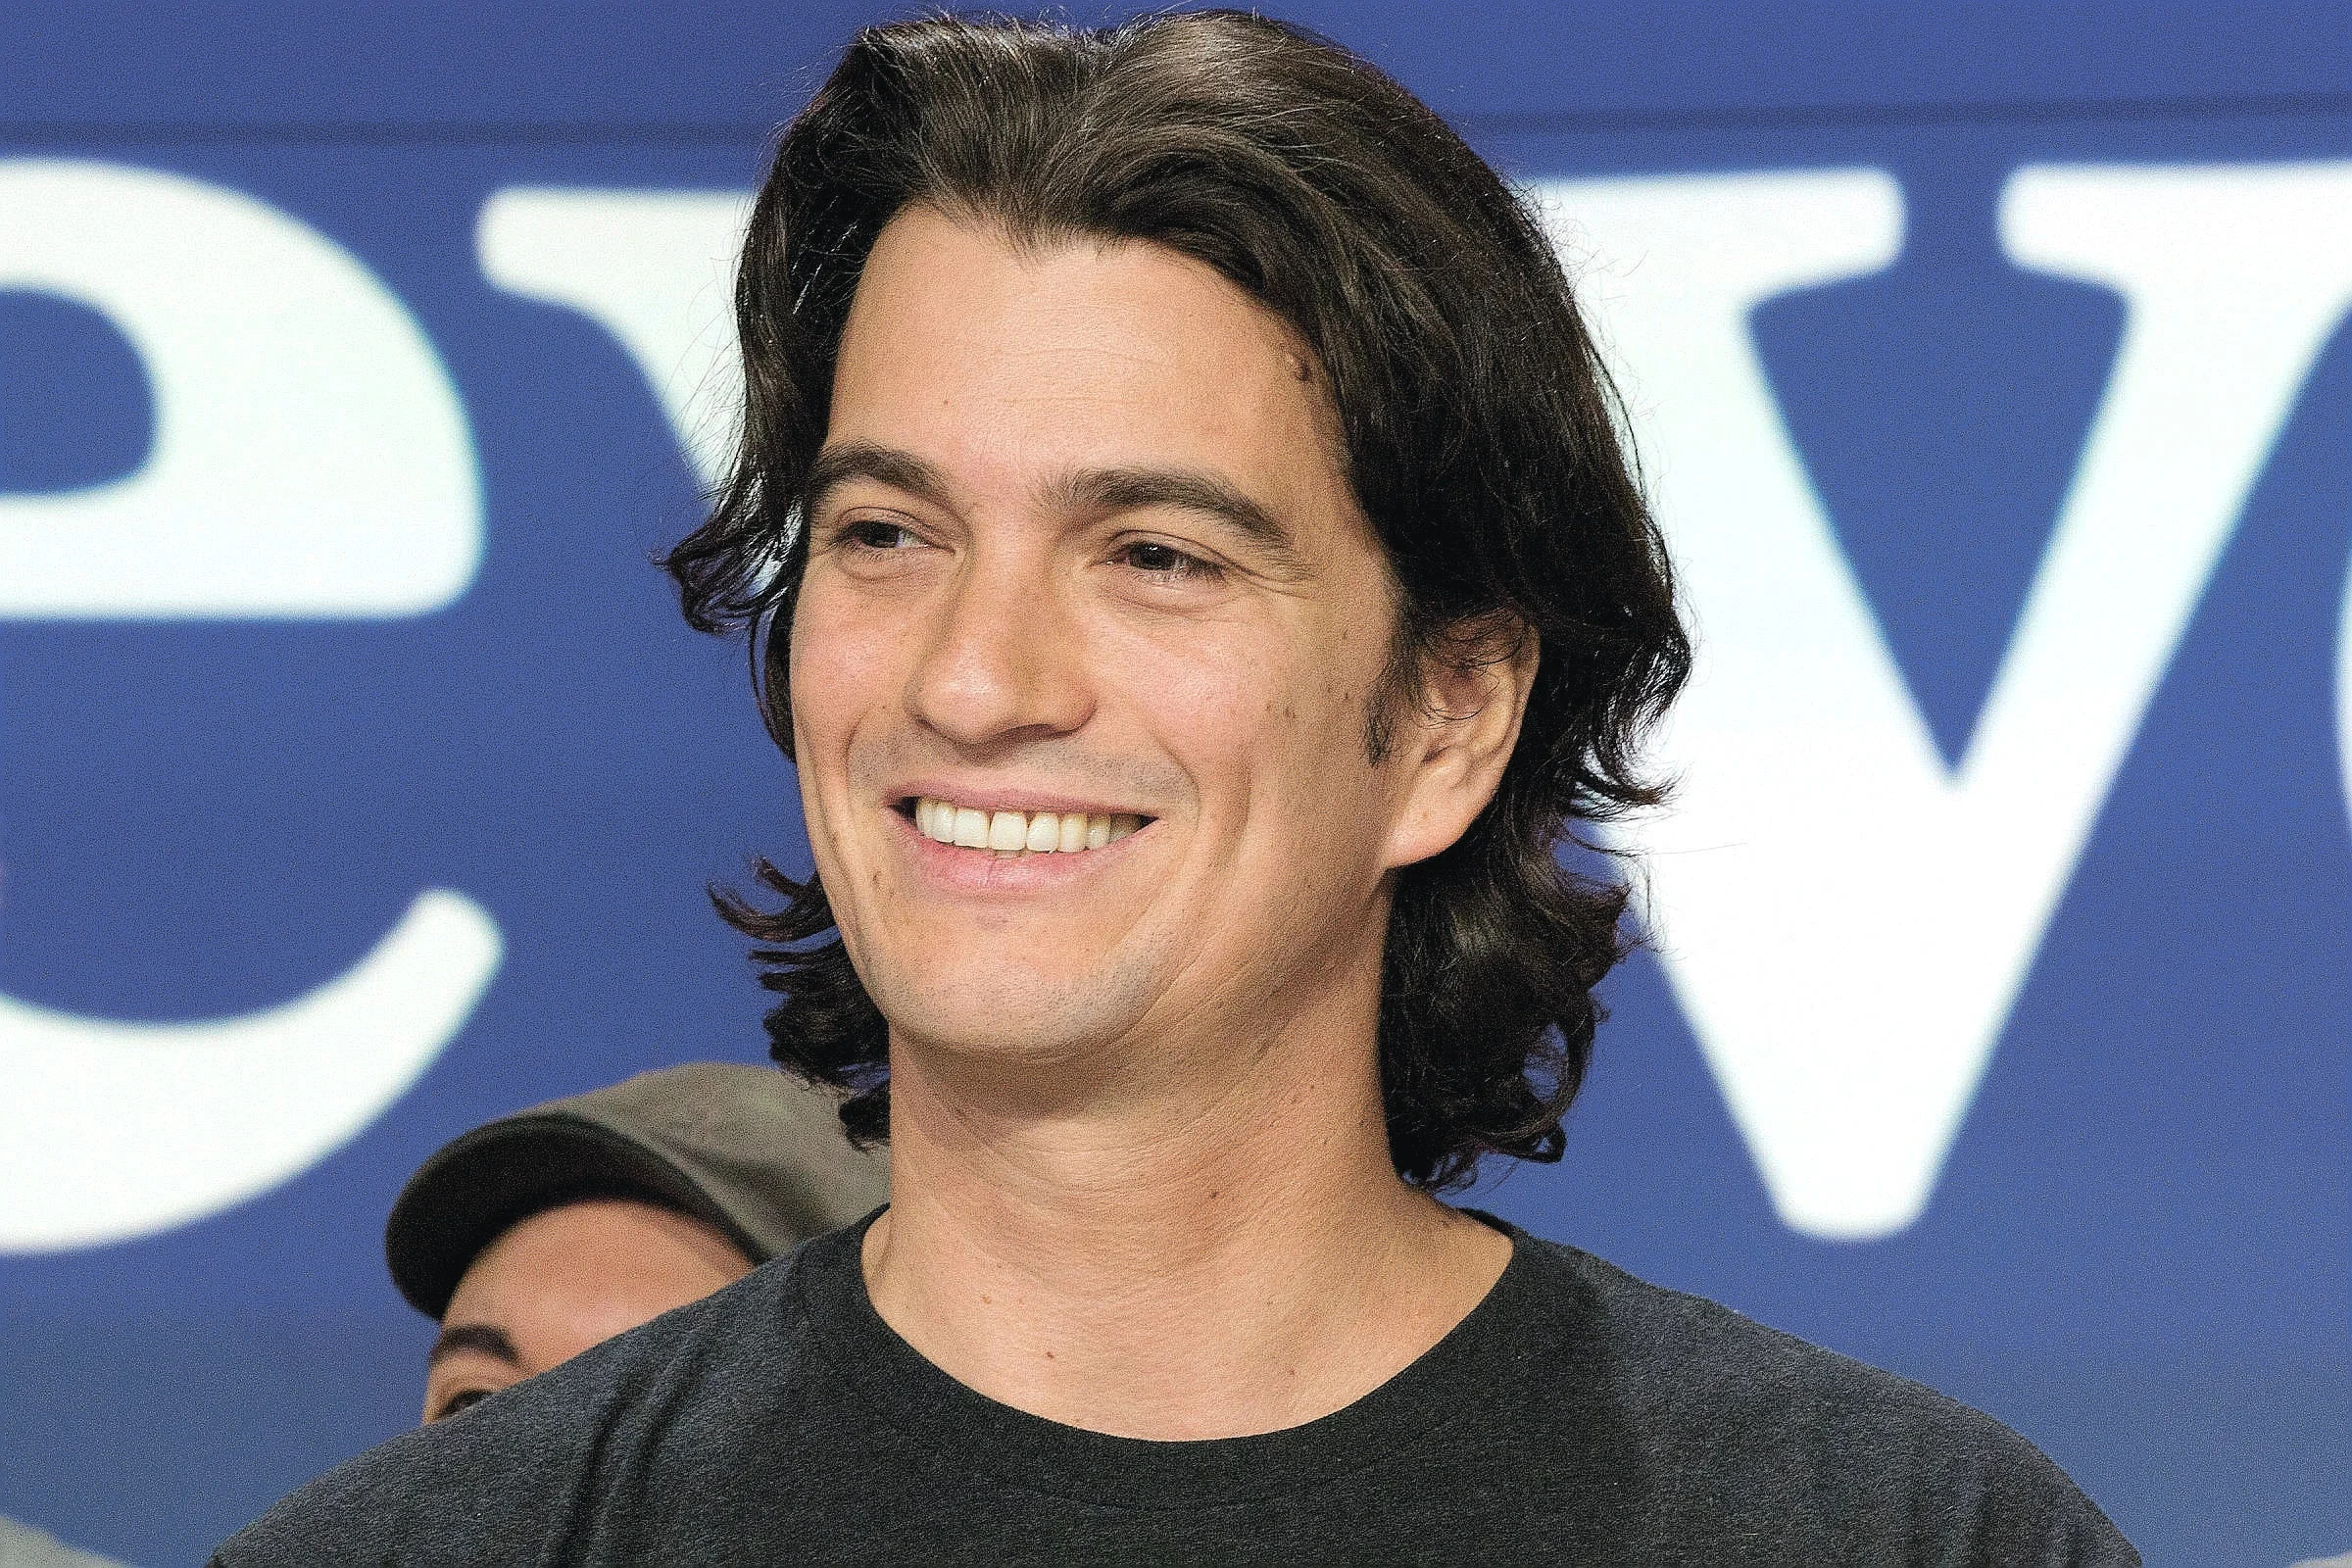 WeCrashed (TV Series): Adam Neumann, businessman and investor, Co-founded WeWork with Miguel McKelvey. 2400x1600 HD Background.